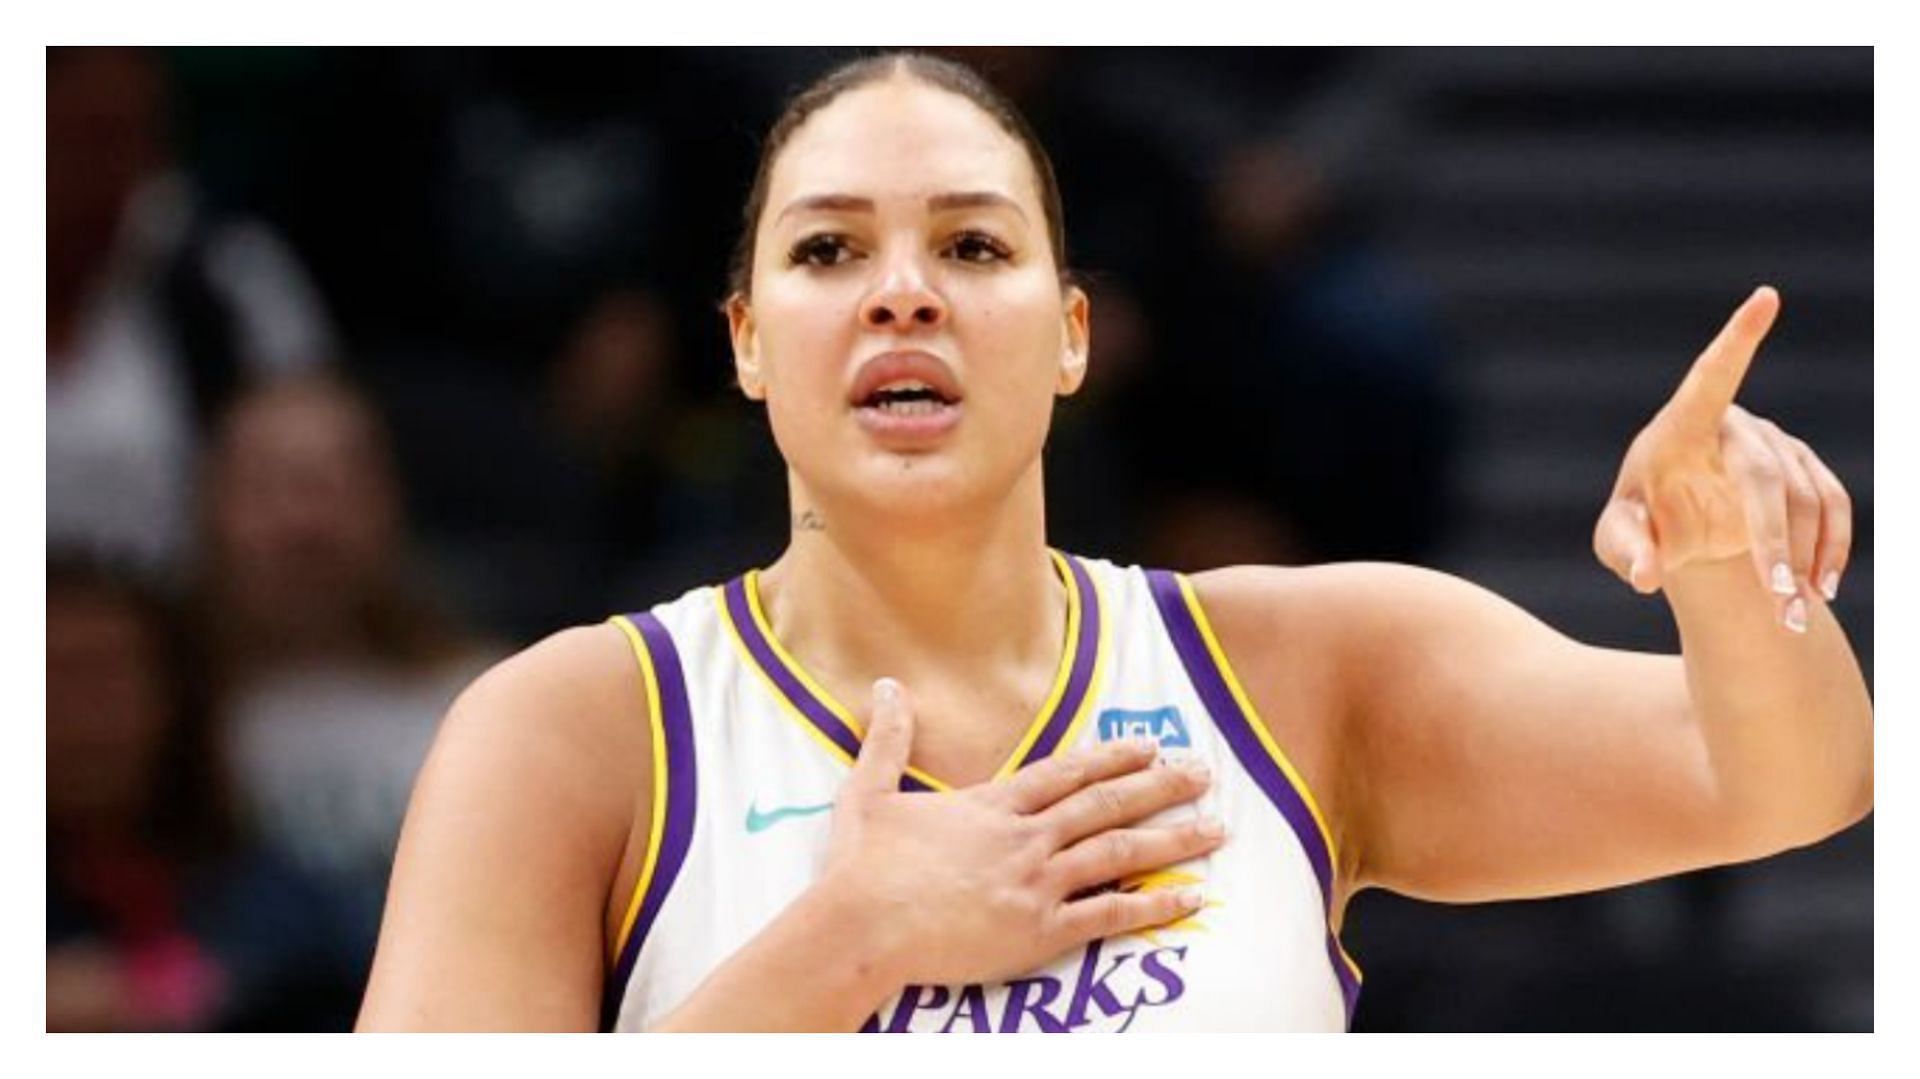 Liz Cambage hurled racial slurs during a warm-up match in 2021 (Image via Steph Chambers/Getty Images)